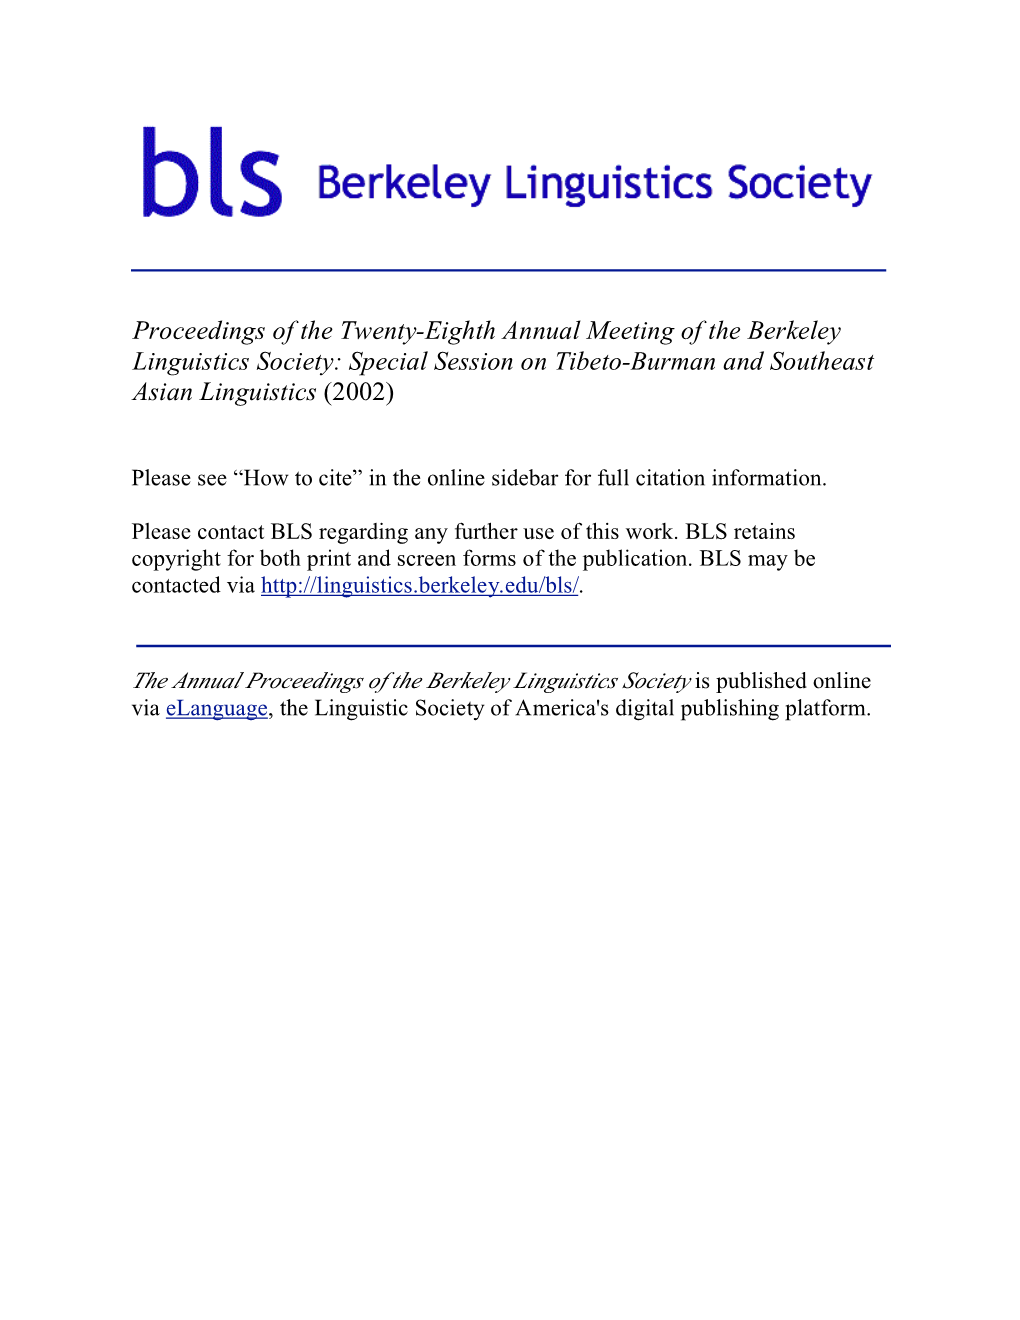 Special Session on Tibeto-Burman and Southeast Asian Linguistics (2002)